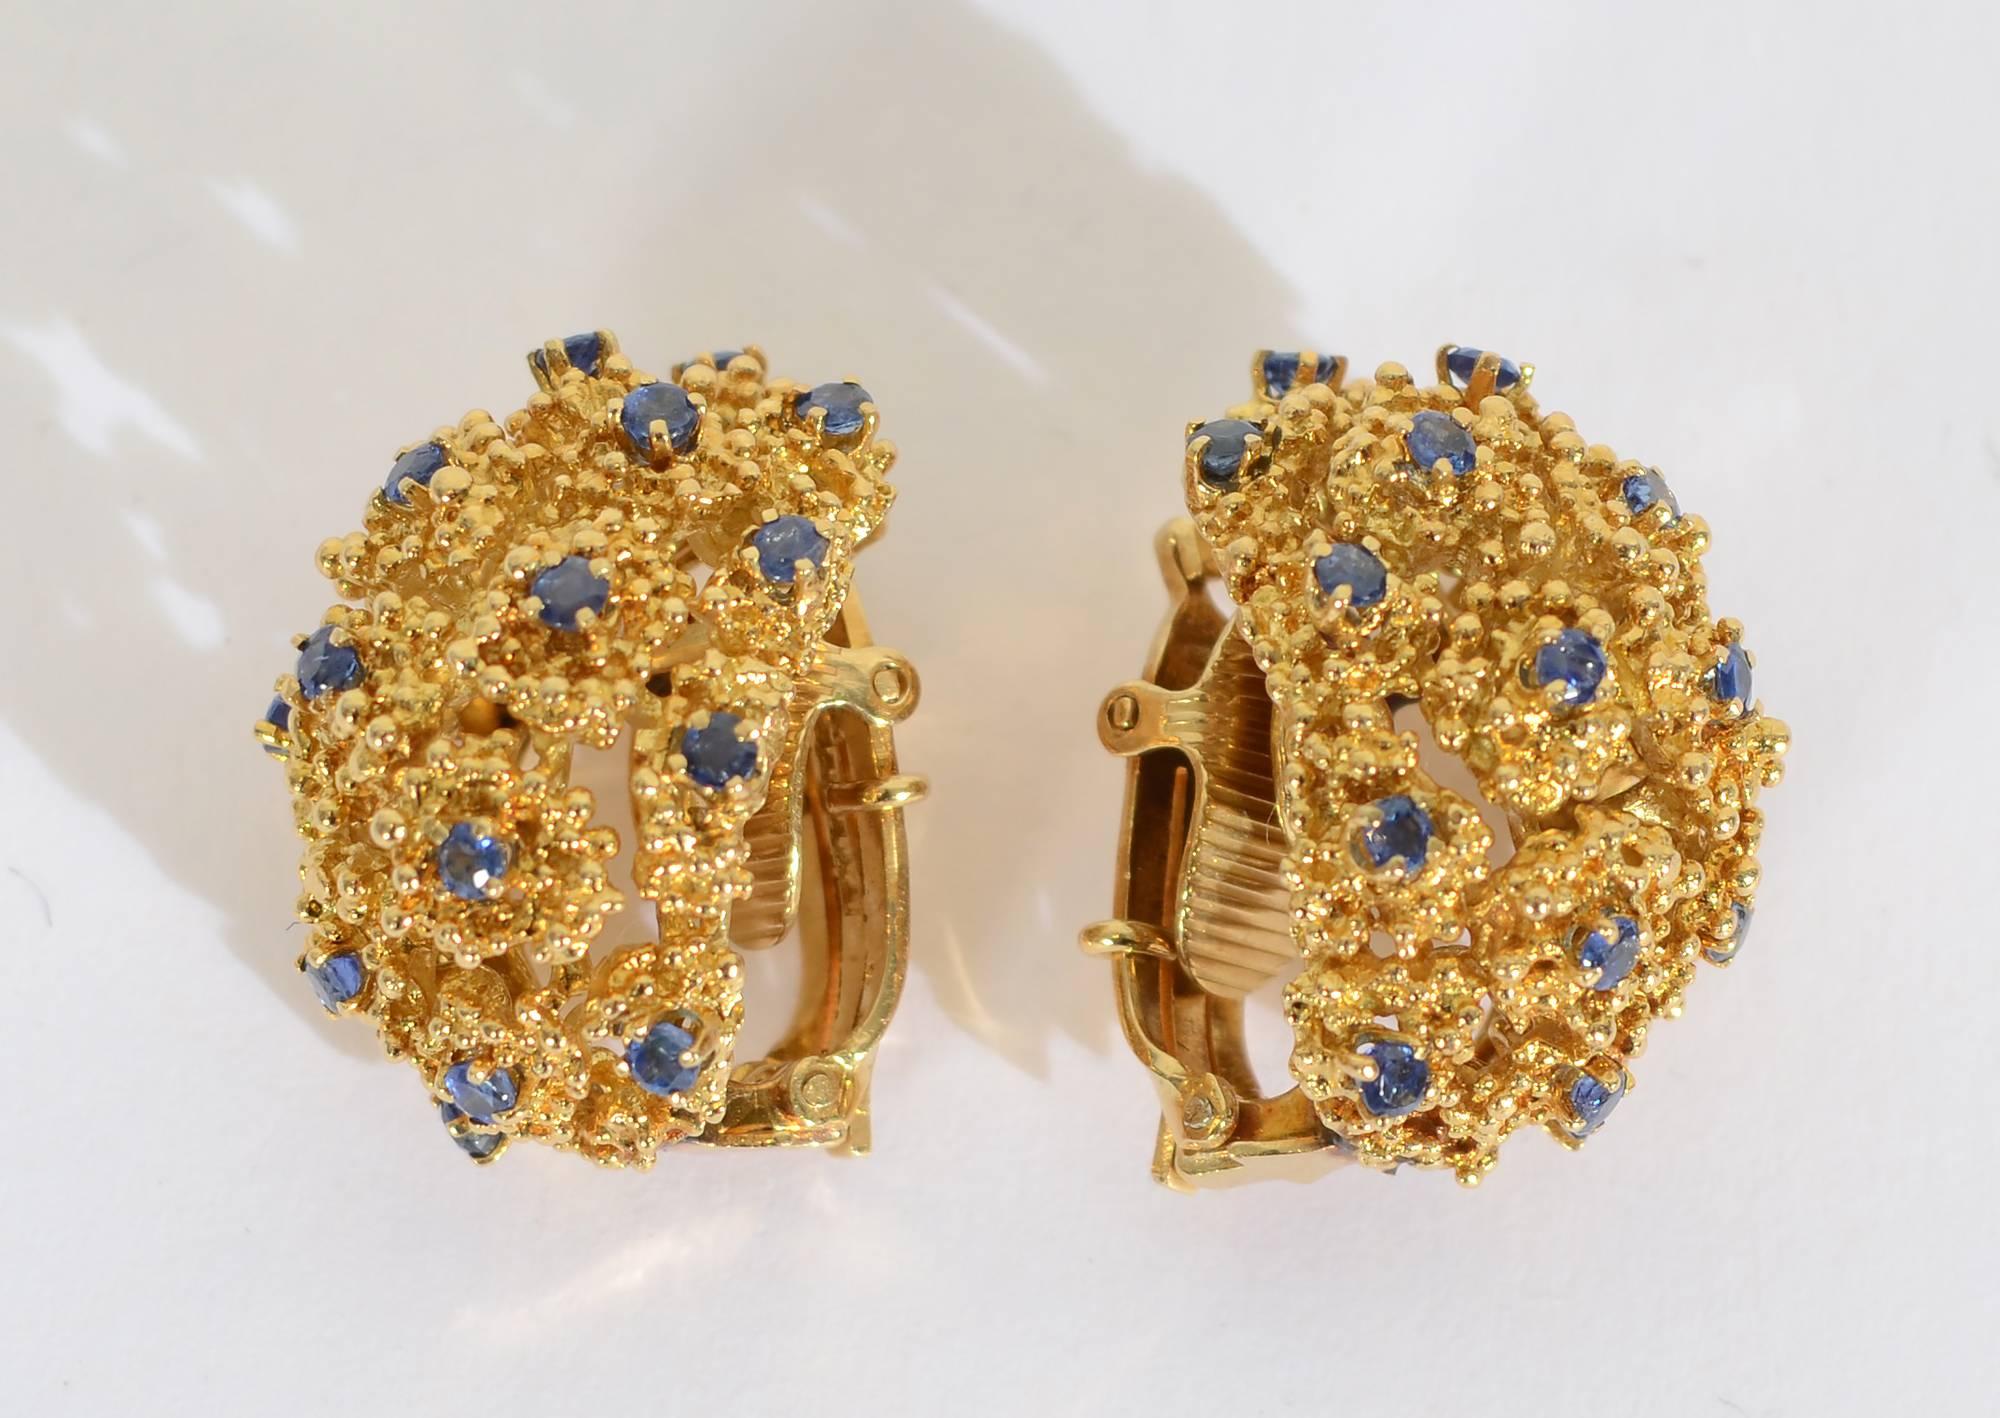 Tiffany half round  earrings with sapphires surrounded by clusters of heavily textured irregular circles. The earrings are 18 karat gold. Clip backs can be converted to posts. They are 1 inch long and 3/4 